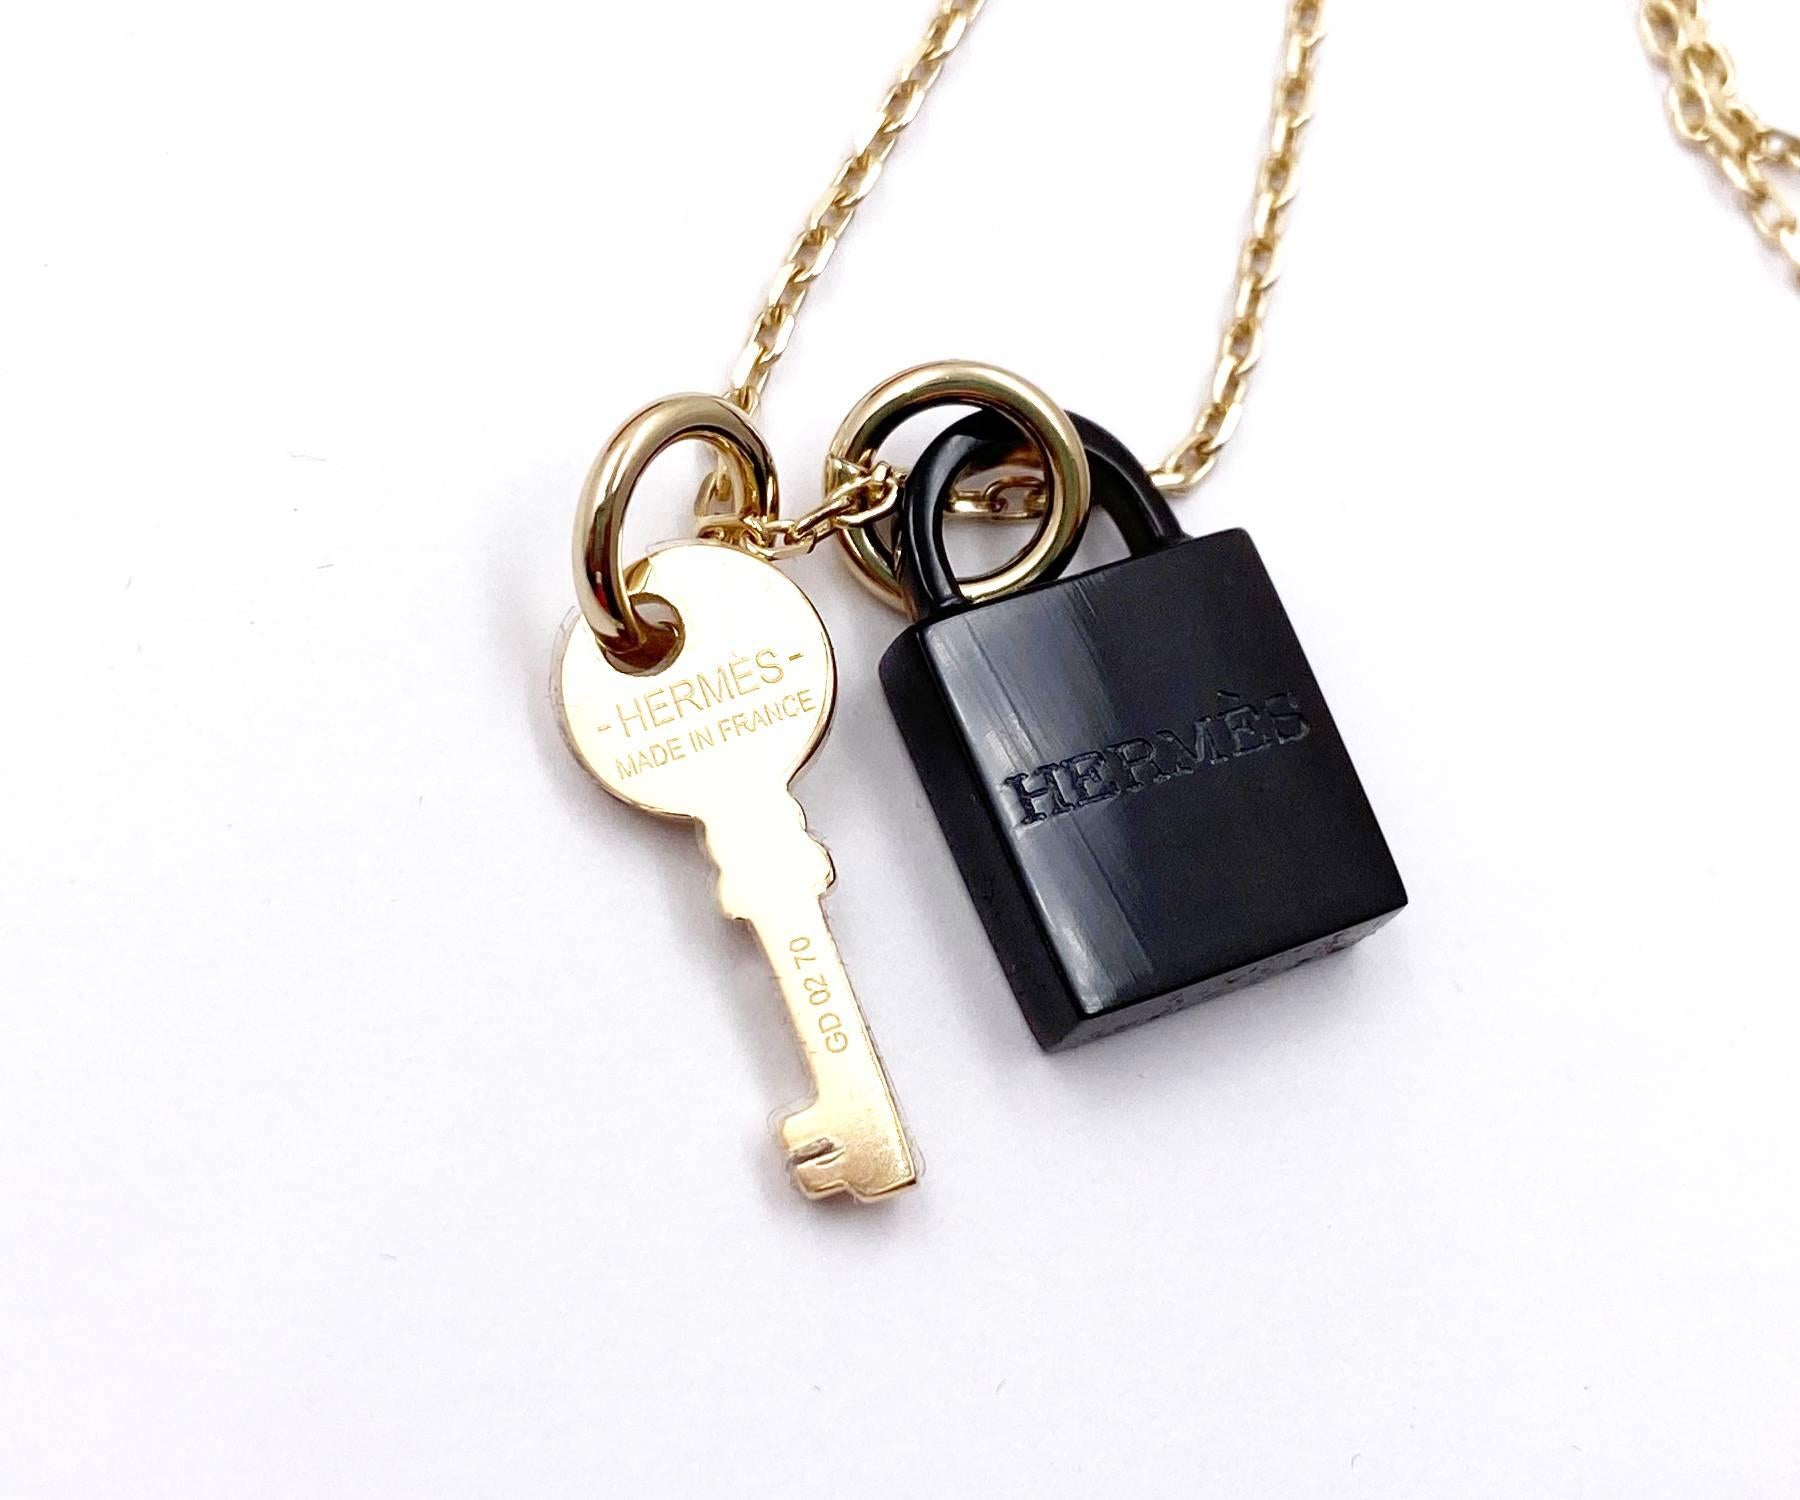 Hermes Brand New Amulette Padlock PM Brown Gold Necklace

*Marked Hermes
*Made in France
*Comes with original box, pouch, booklet and ribbon
*Brand New

-The chain is approximately 19